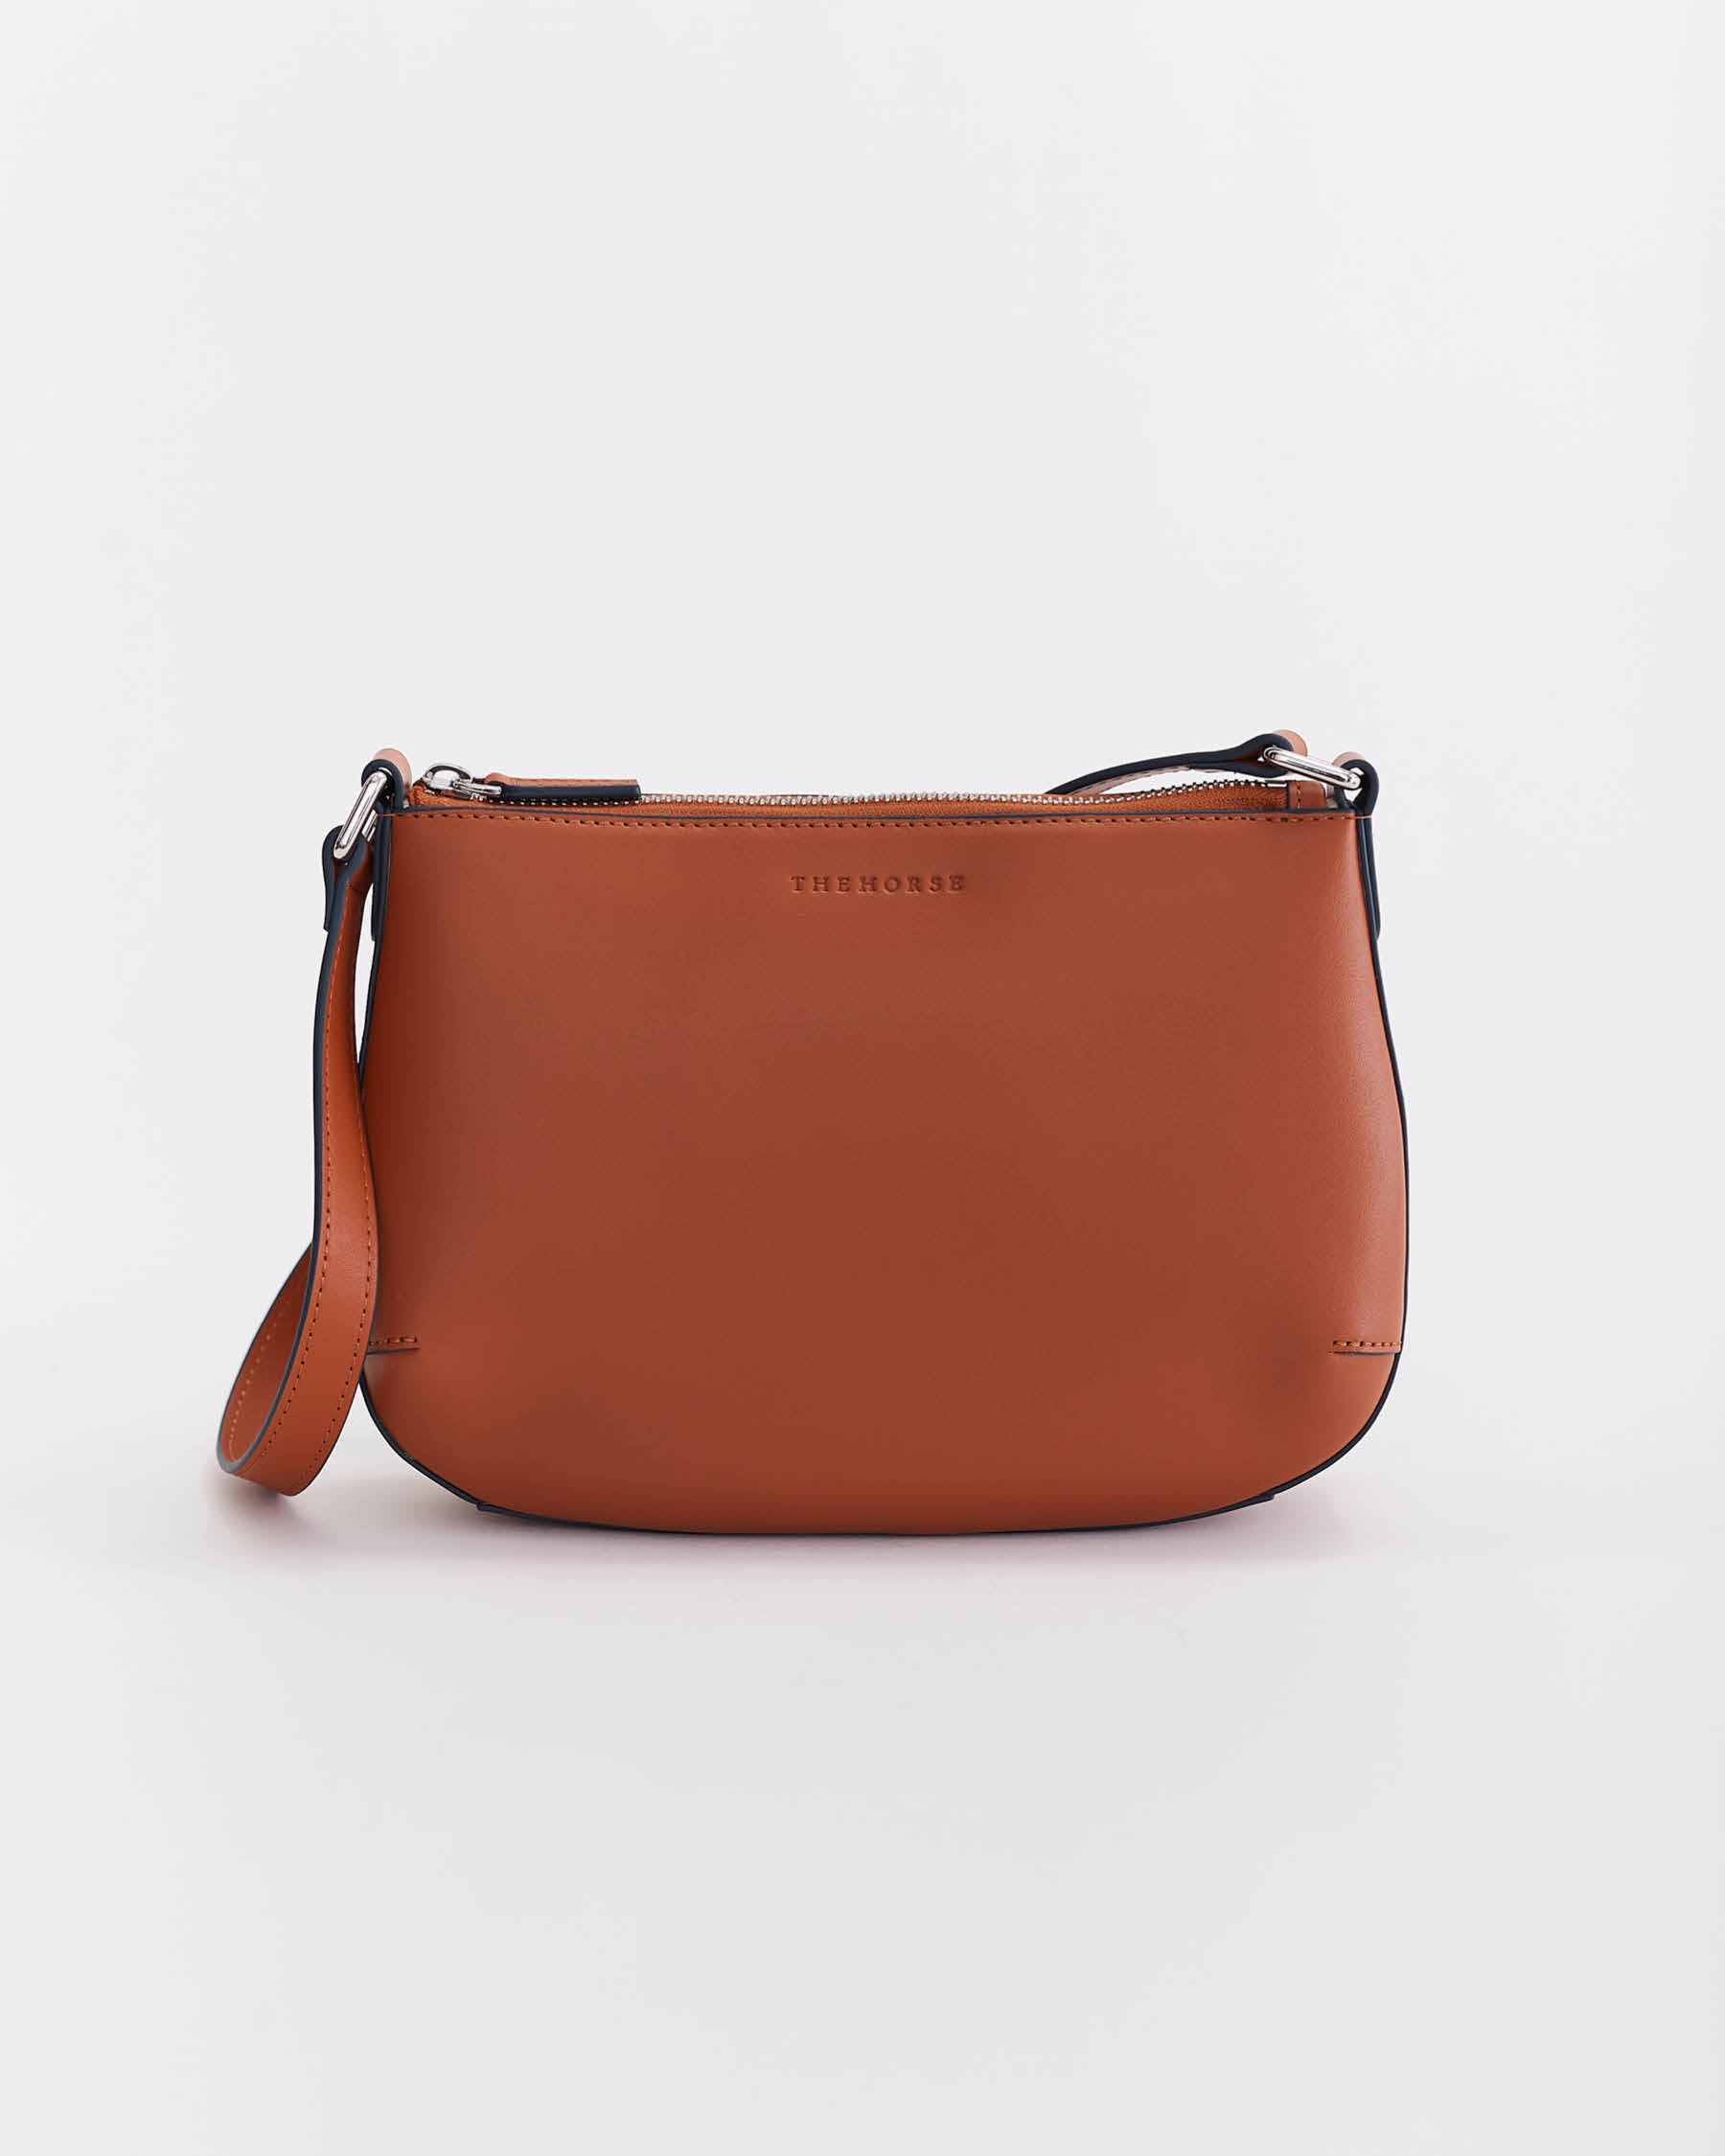 Drew Bag: Leather Bag in Tan | The Horse